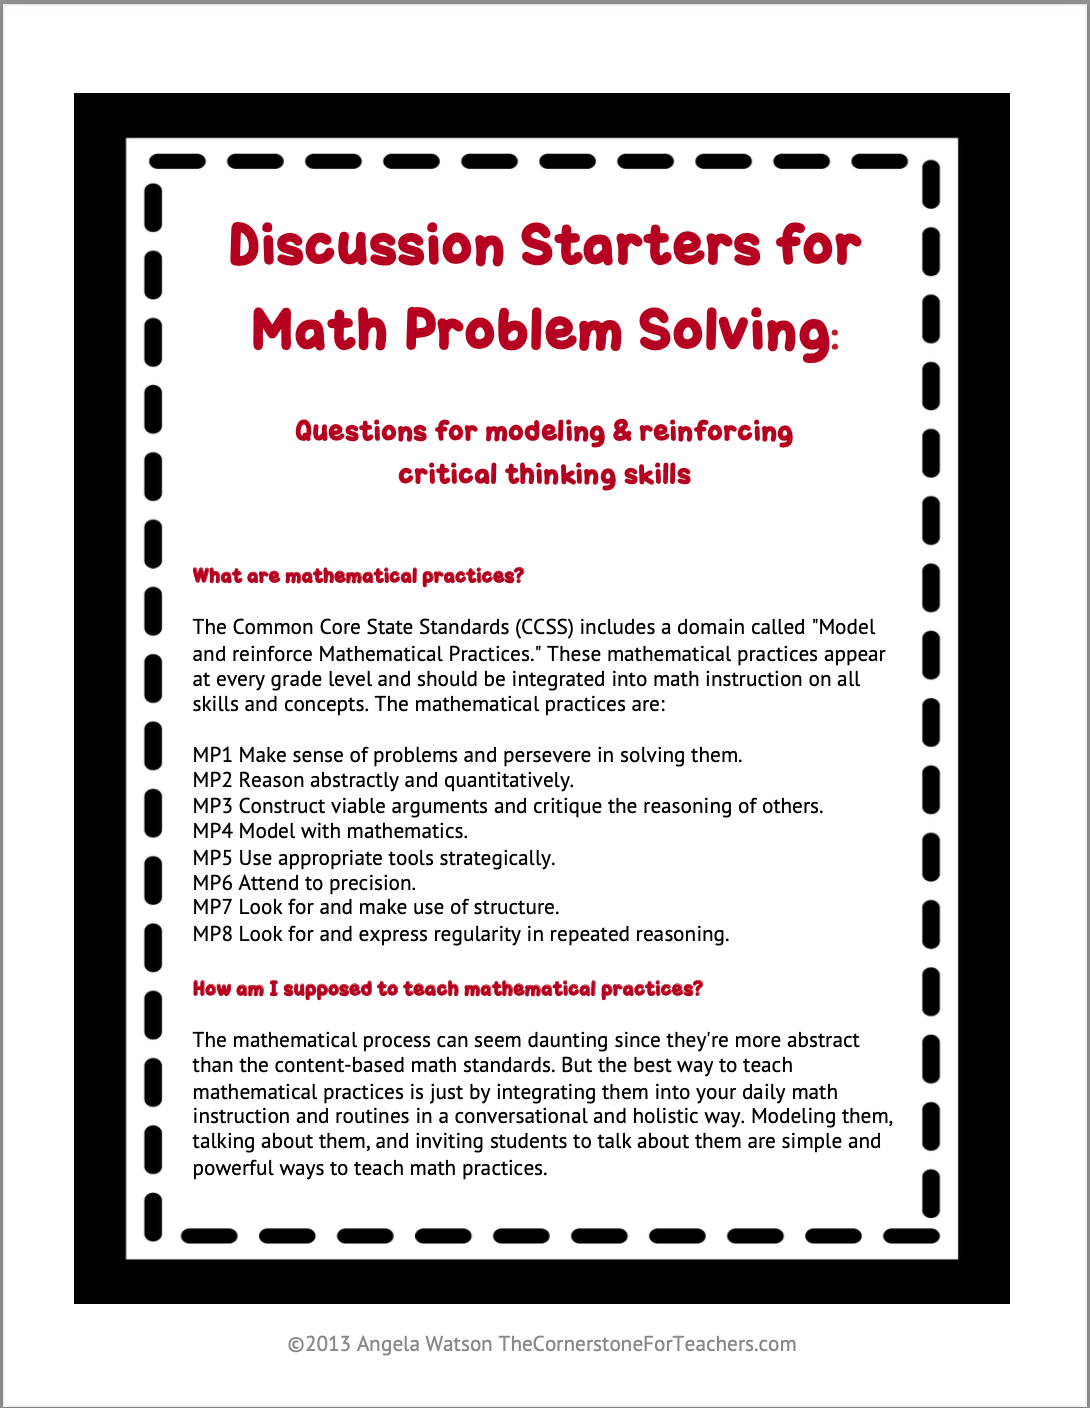 Math Discussion Starters for Problem Solving